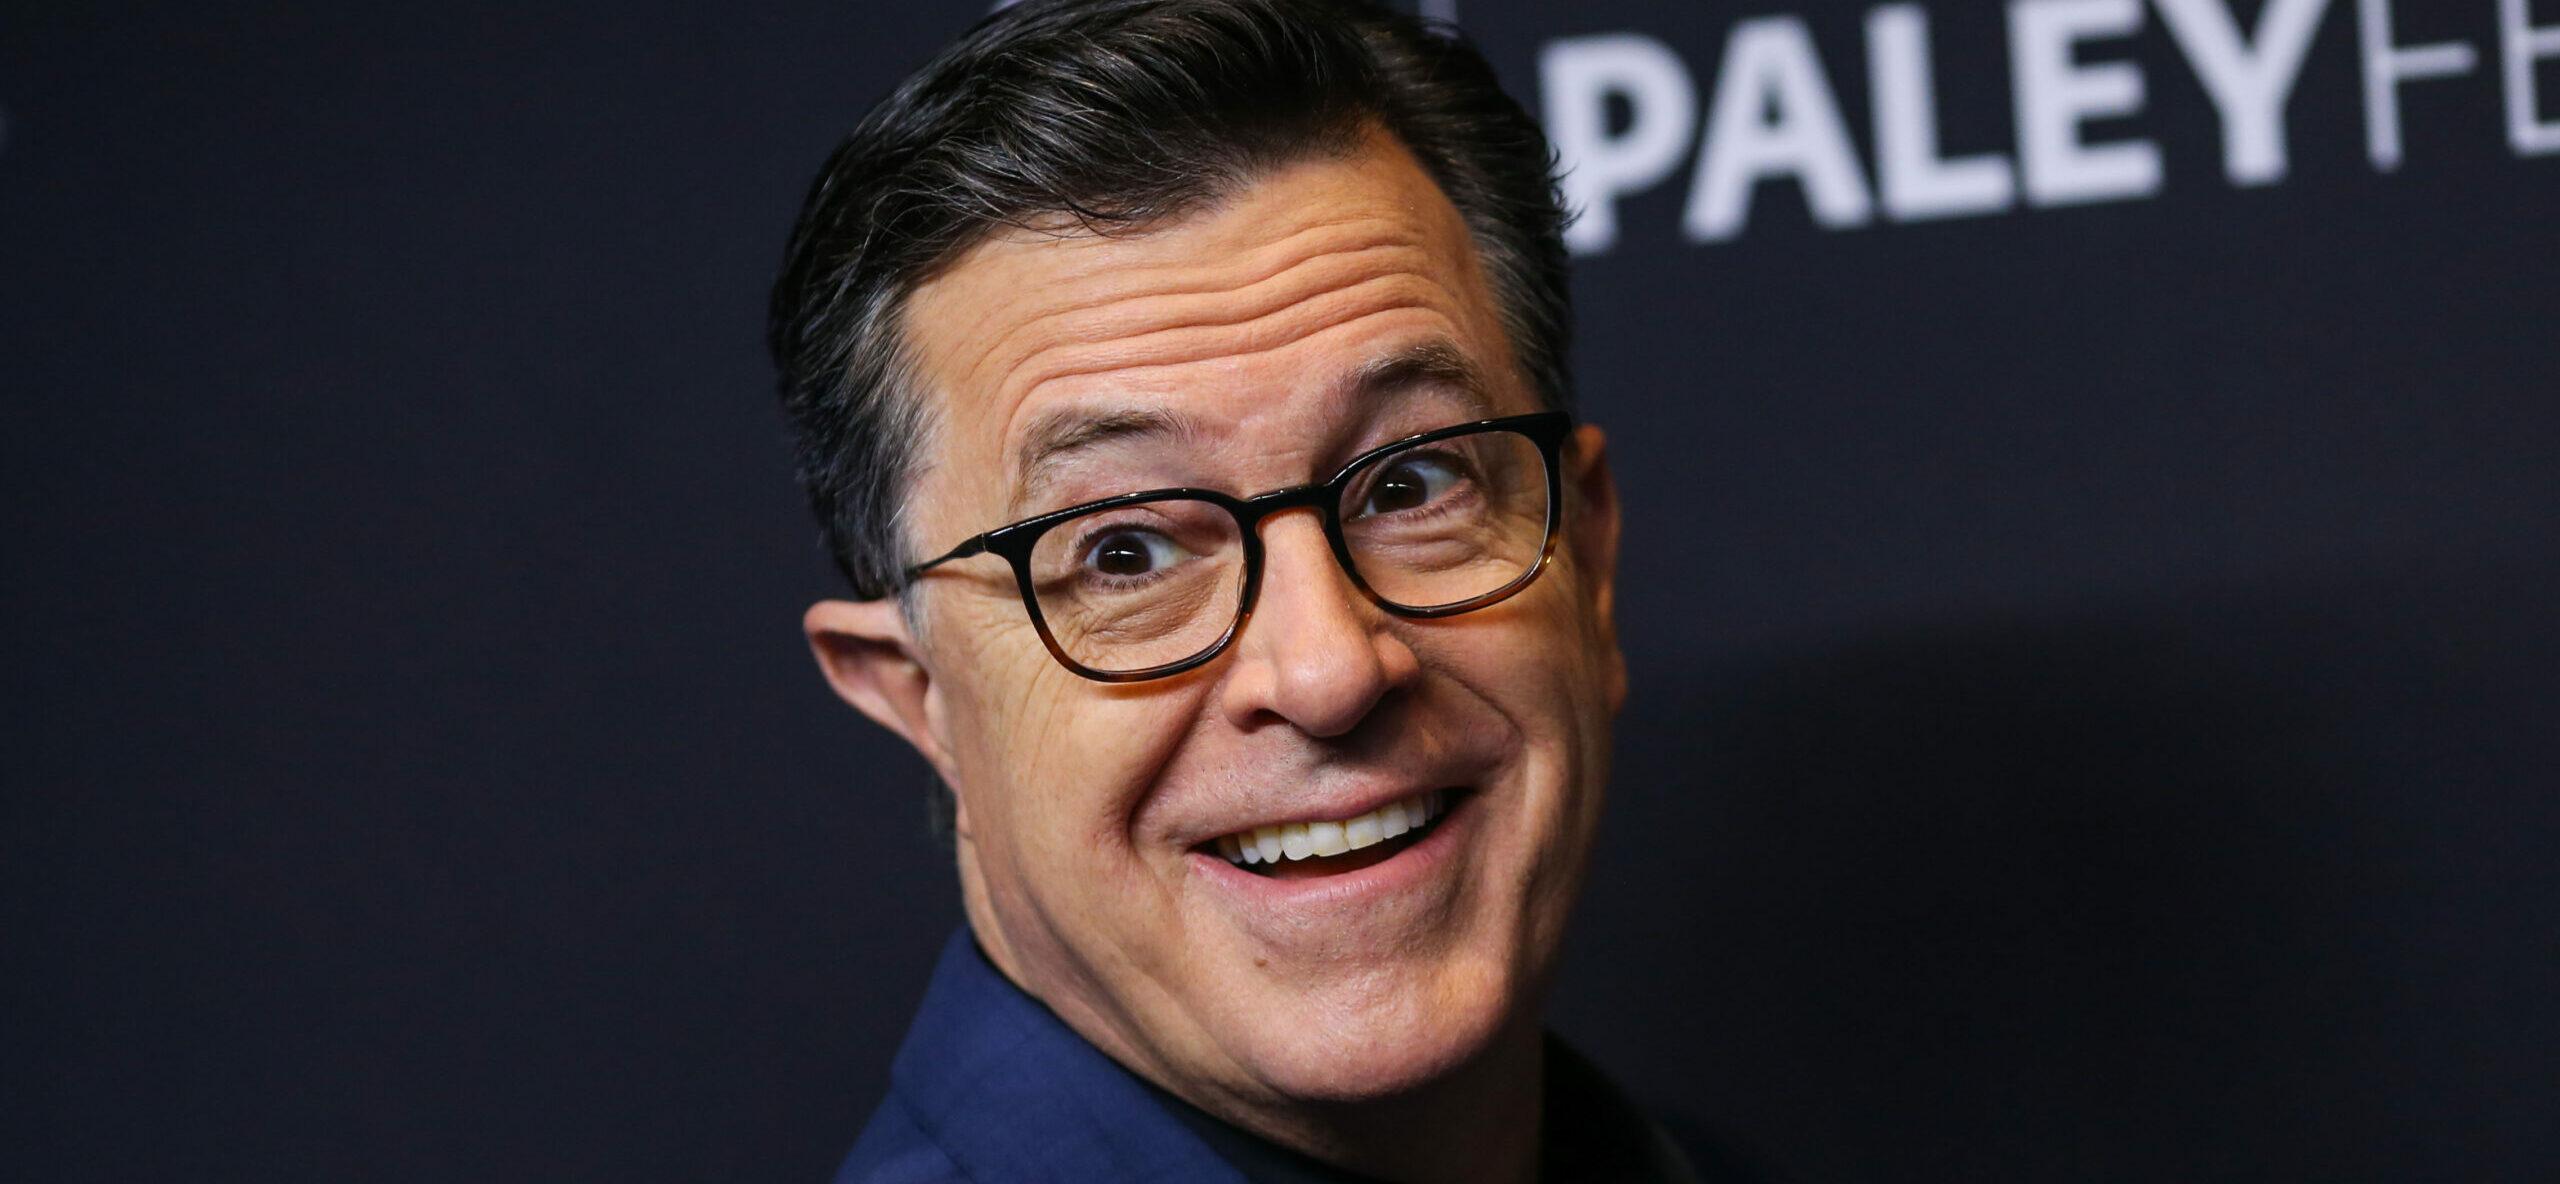 Stephen Colbert Suffers A Ruptured Appendix, Cancels ‘The Late Show’ While He Recovers